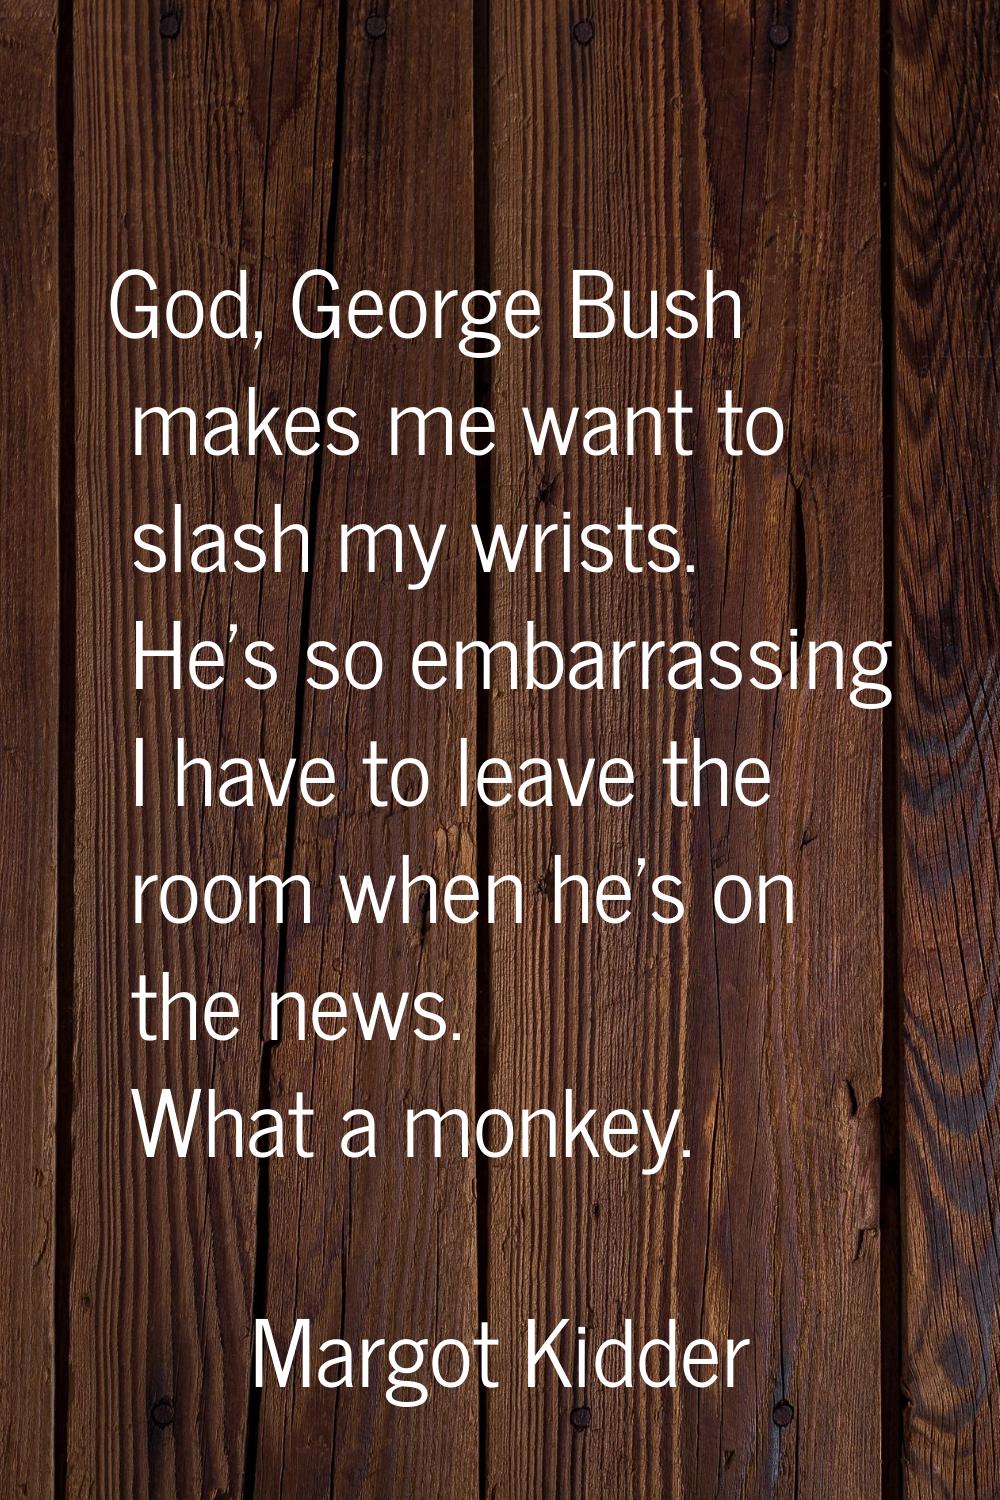 God, George Bush makes me want to slash my wrists. He's so embarrassing I have to leave the room wh